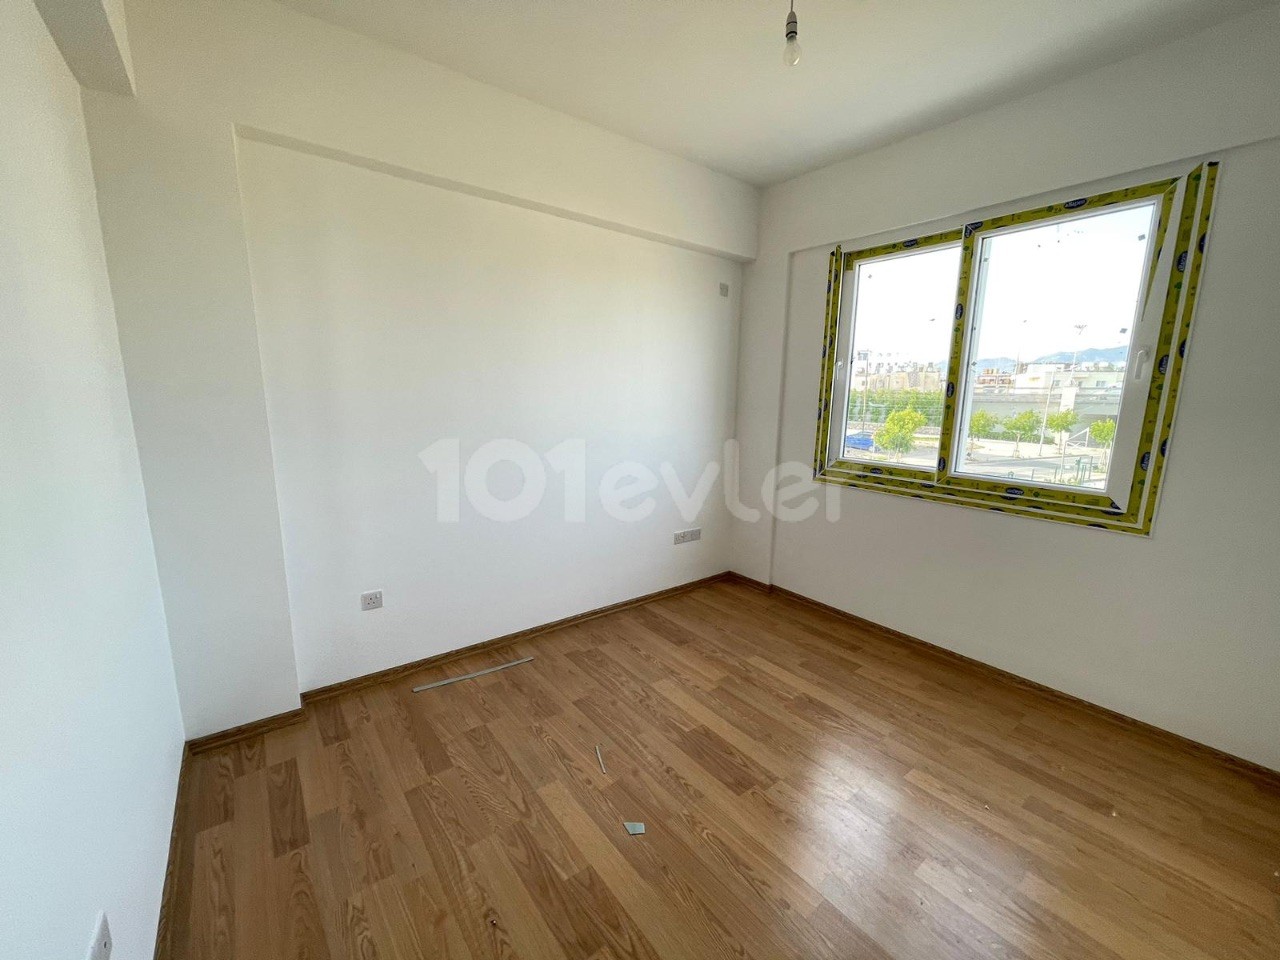 New 3 Bedroom Flat for SALE with Very Beautiful Location in Nicosia Yenikent Area!